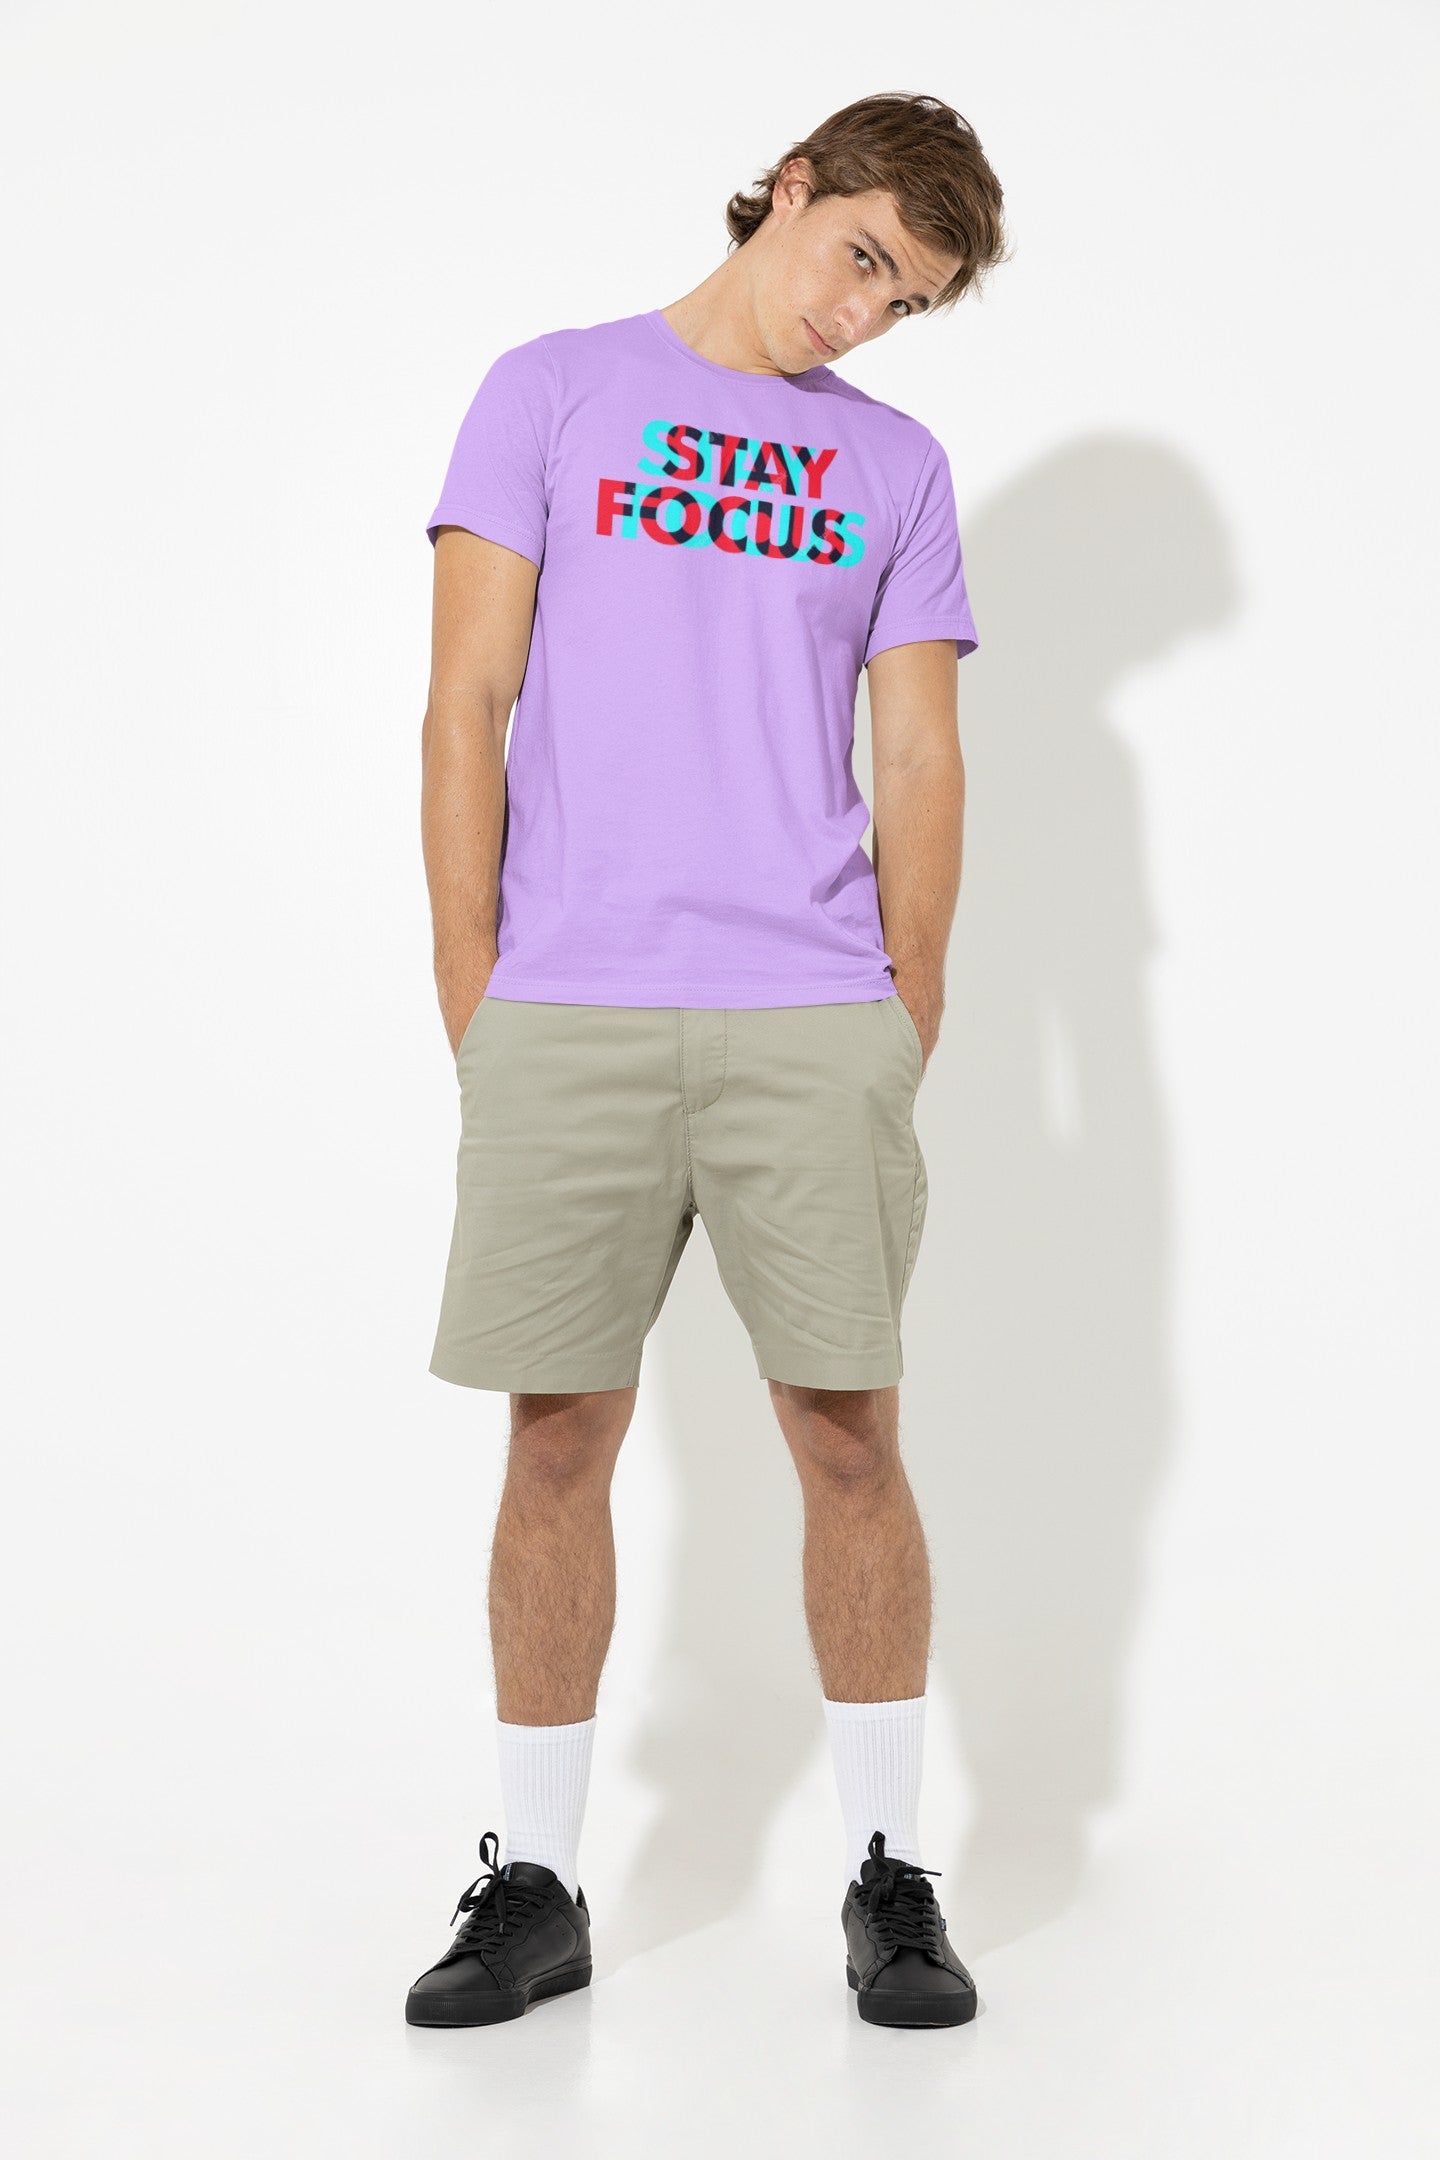 Gym T Shirt - Stay Focus with premium cotton Lycra. The Sports T Shirt by Strong Soul